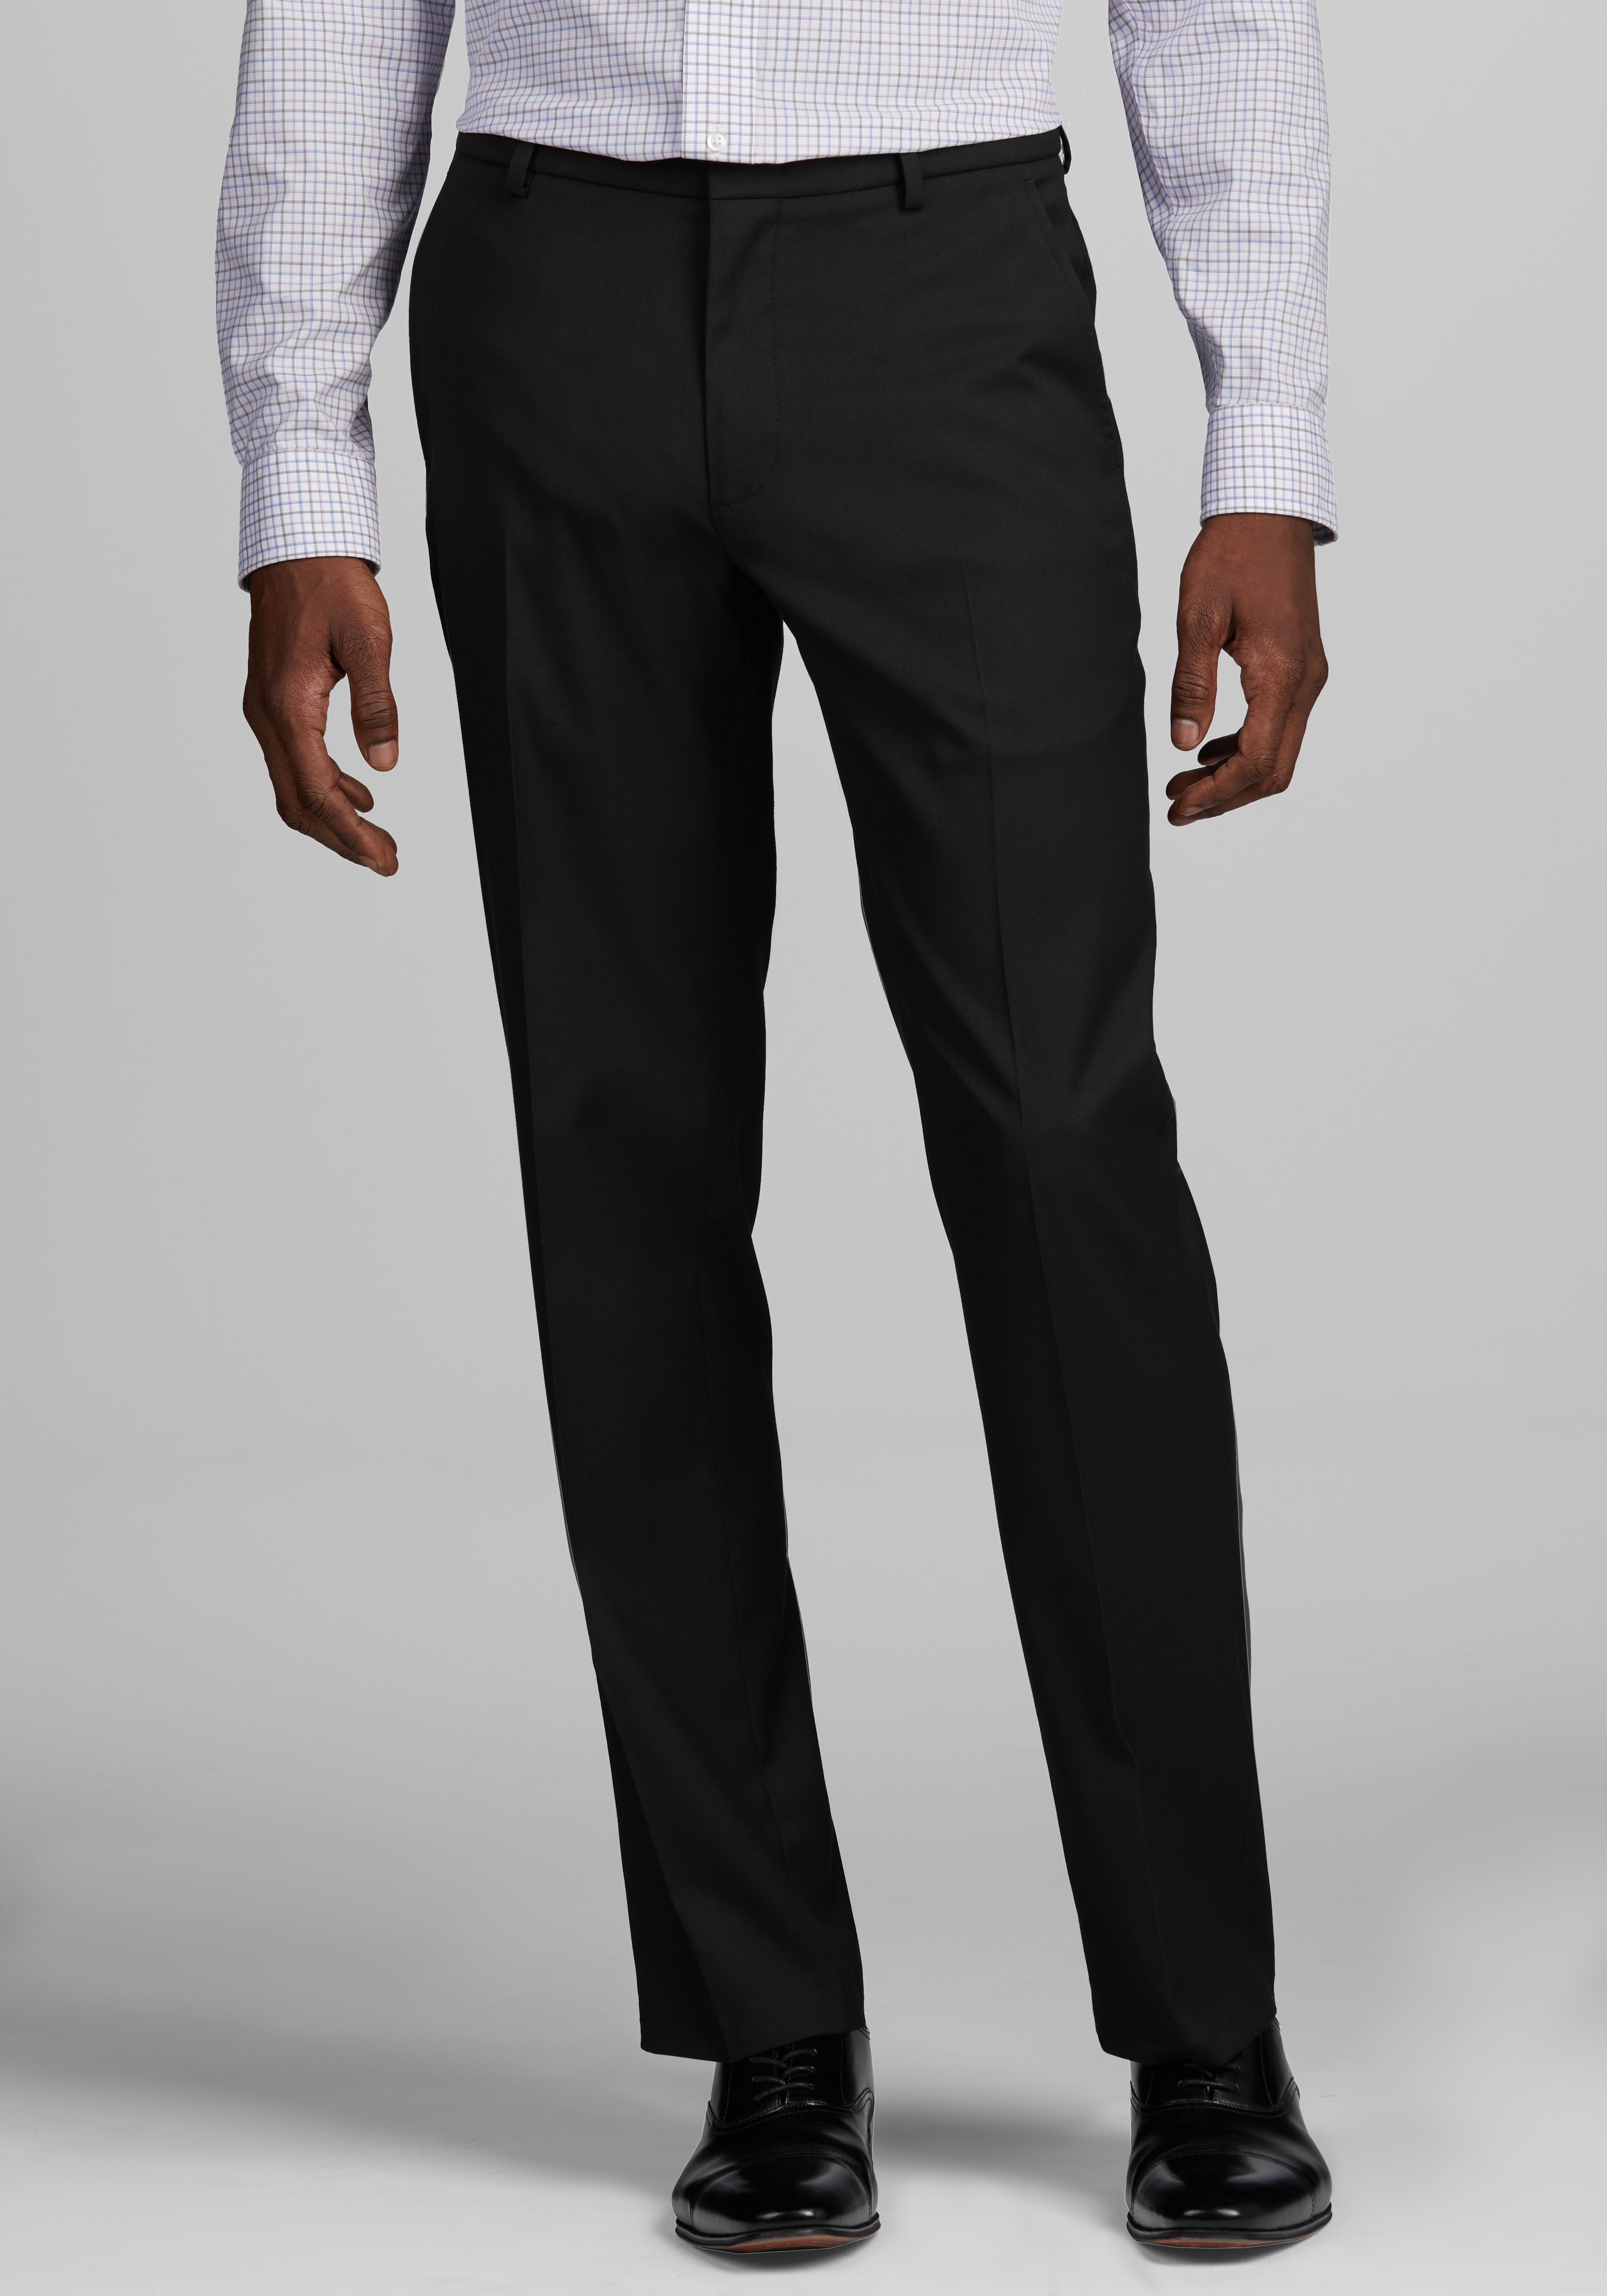 Buy Men's Black Pleat Less Formal Pants for Both Office and Personal Use ( Size - 40) at